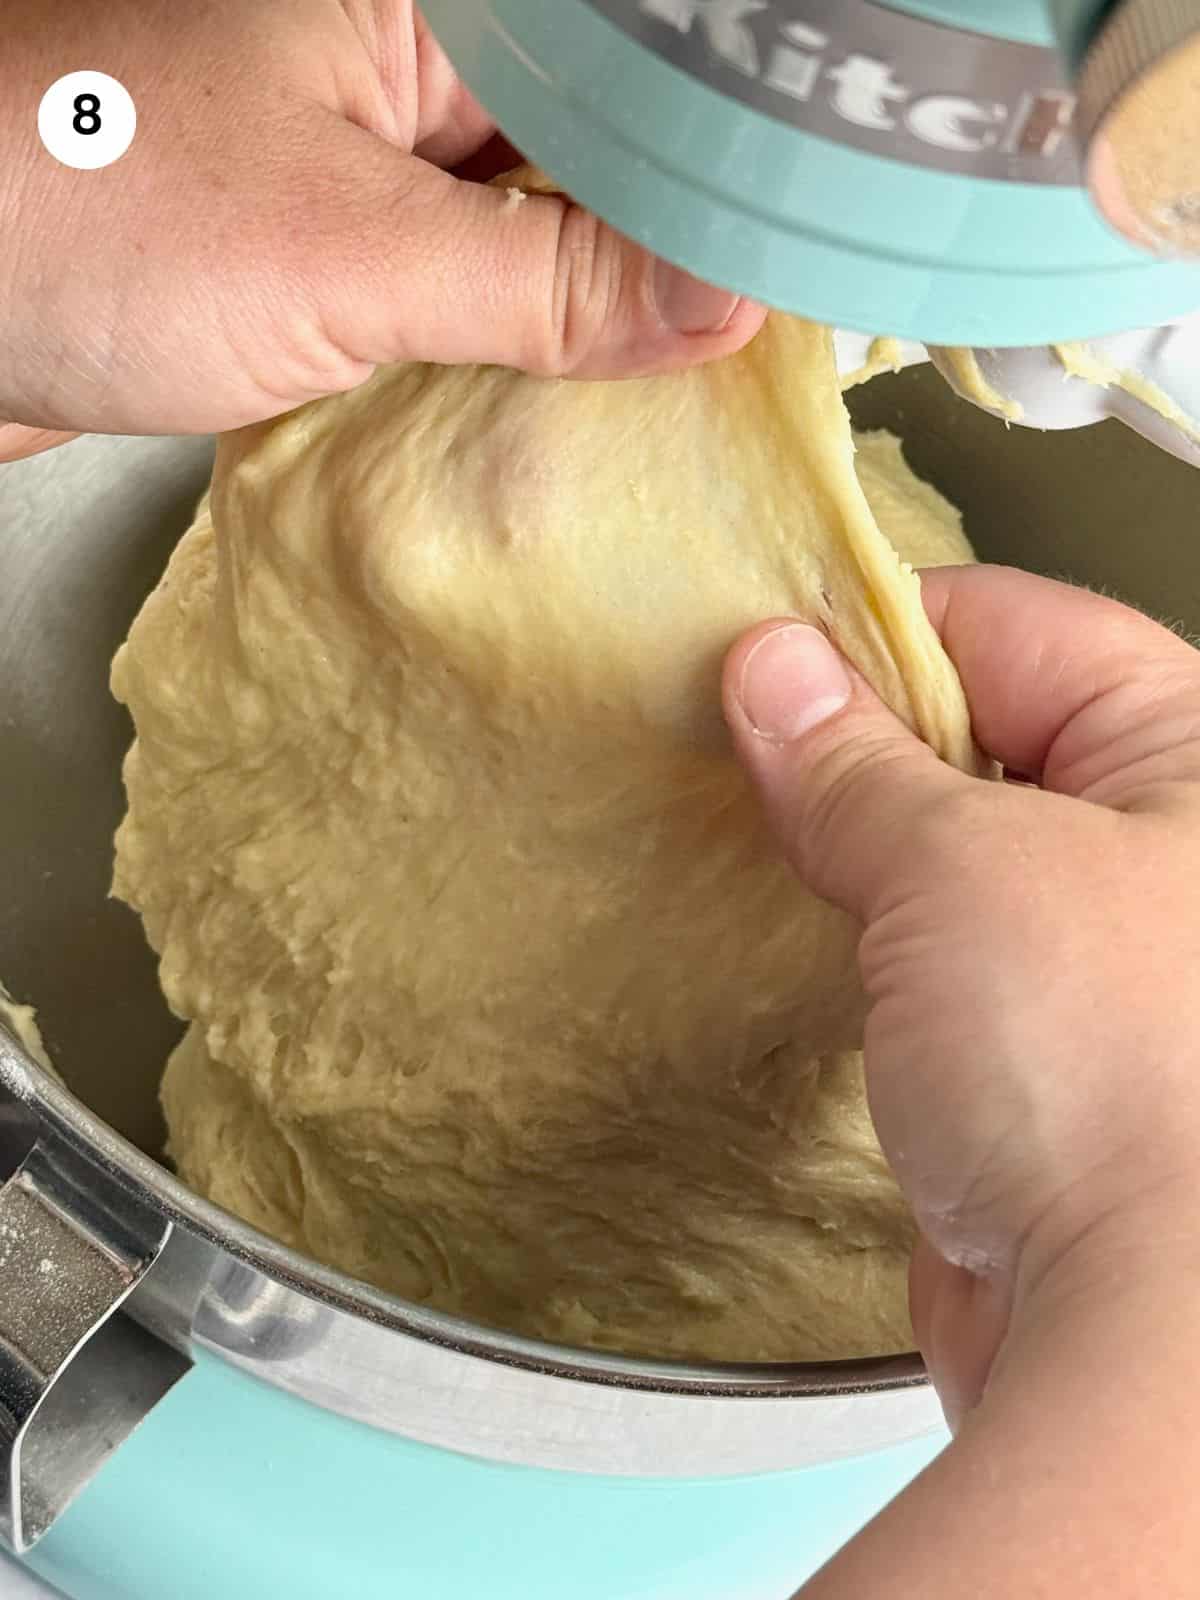 Dough is ready to rest and not sticking to fingers.